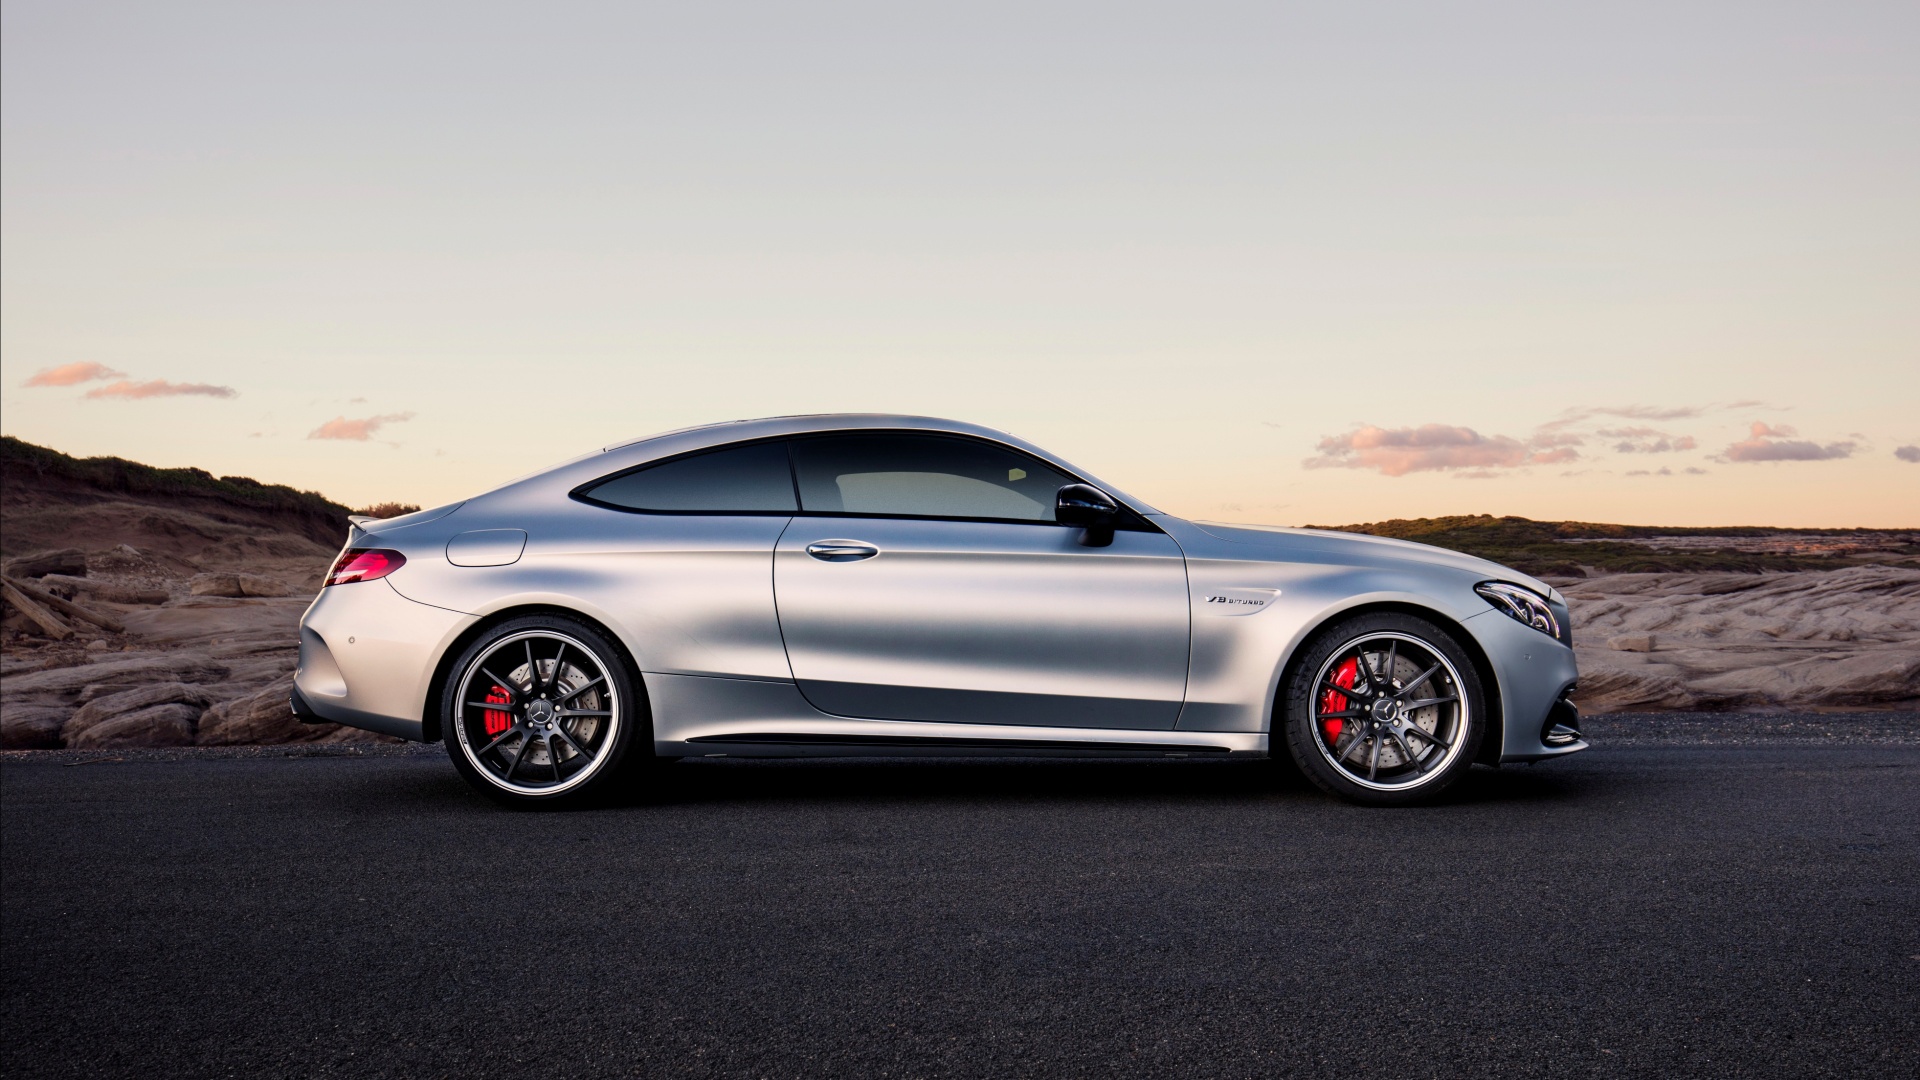 Mercedes AMG C63 S Coupe 2017 Wallpapers   1920x1080   574372